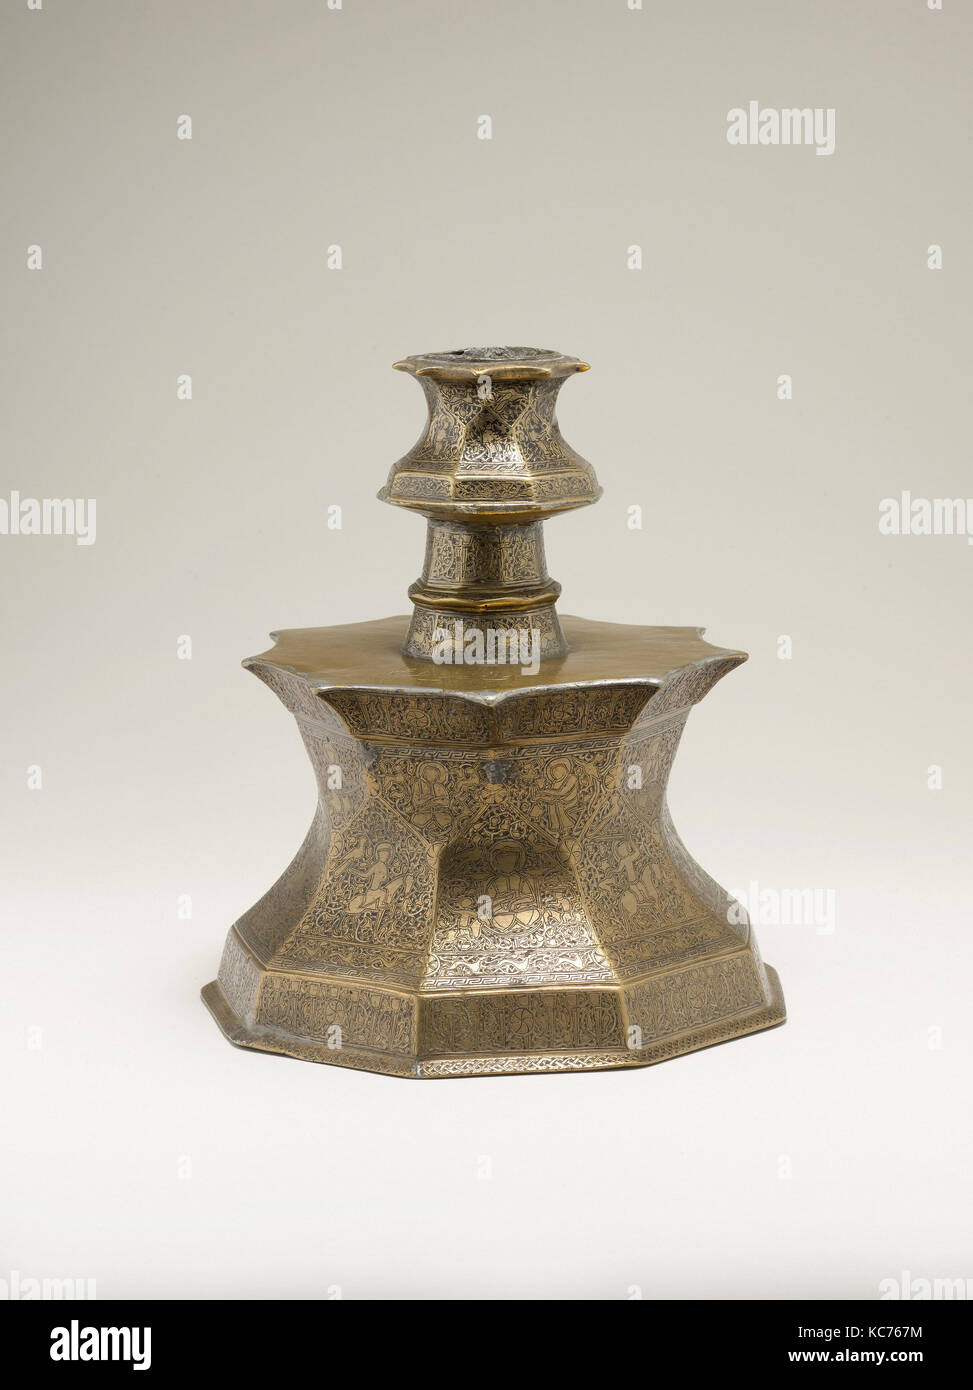 Candlestick with Figural Imagery, first half 14th century Stock Photo